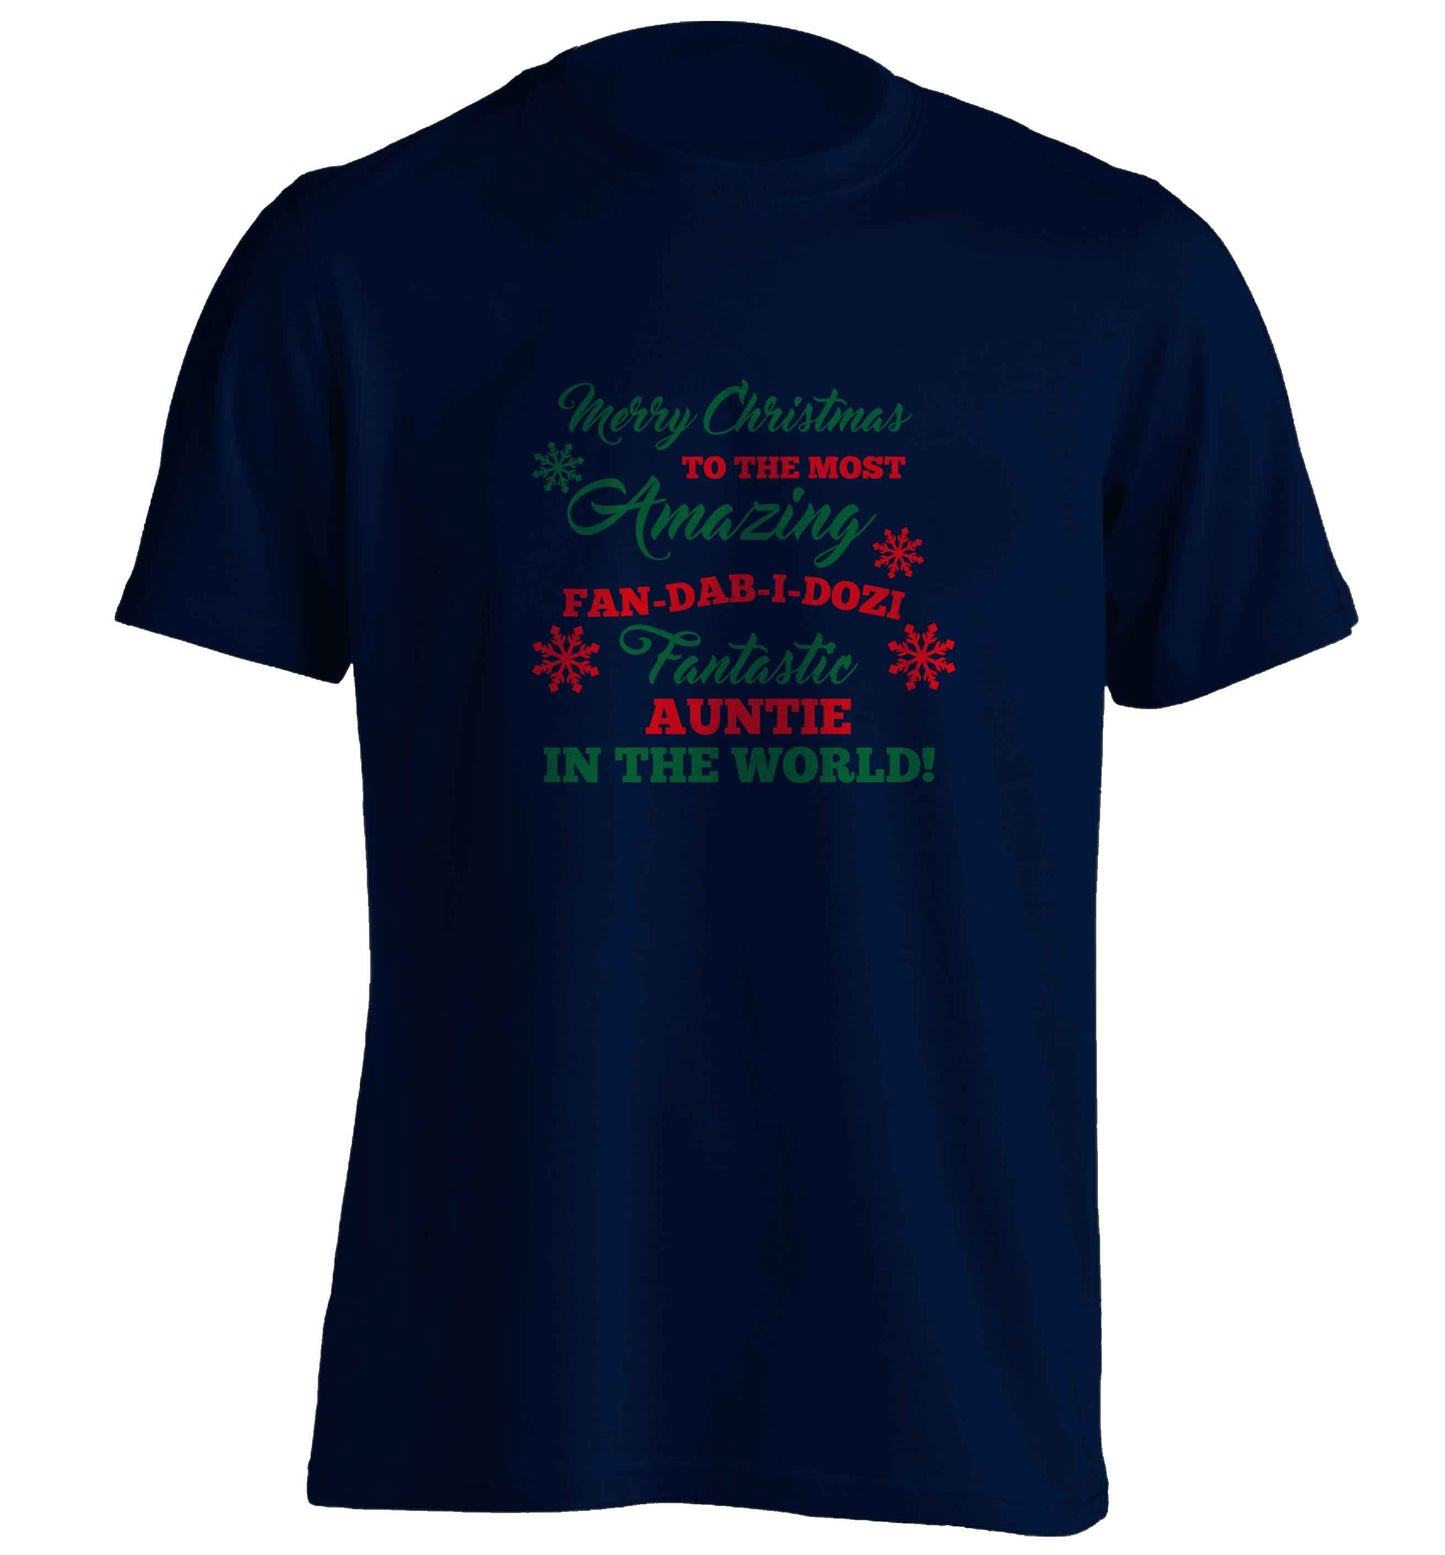 Merry Christmas to the most amazing fan-dab-i-dozi fantasic Auntie in the world adults unisex navy Tshirt 2XL